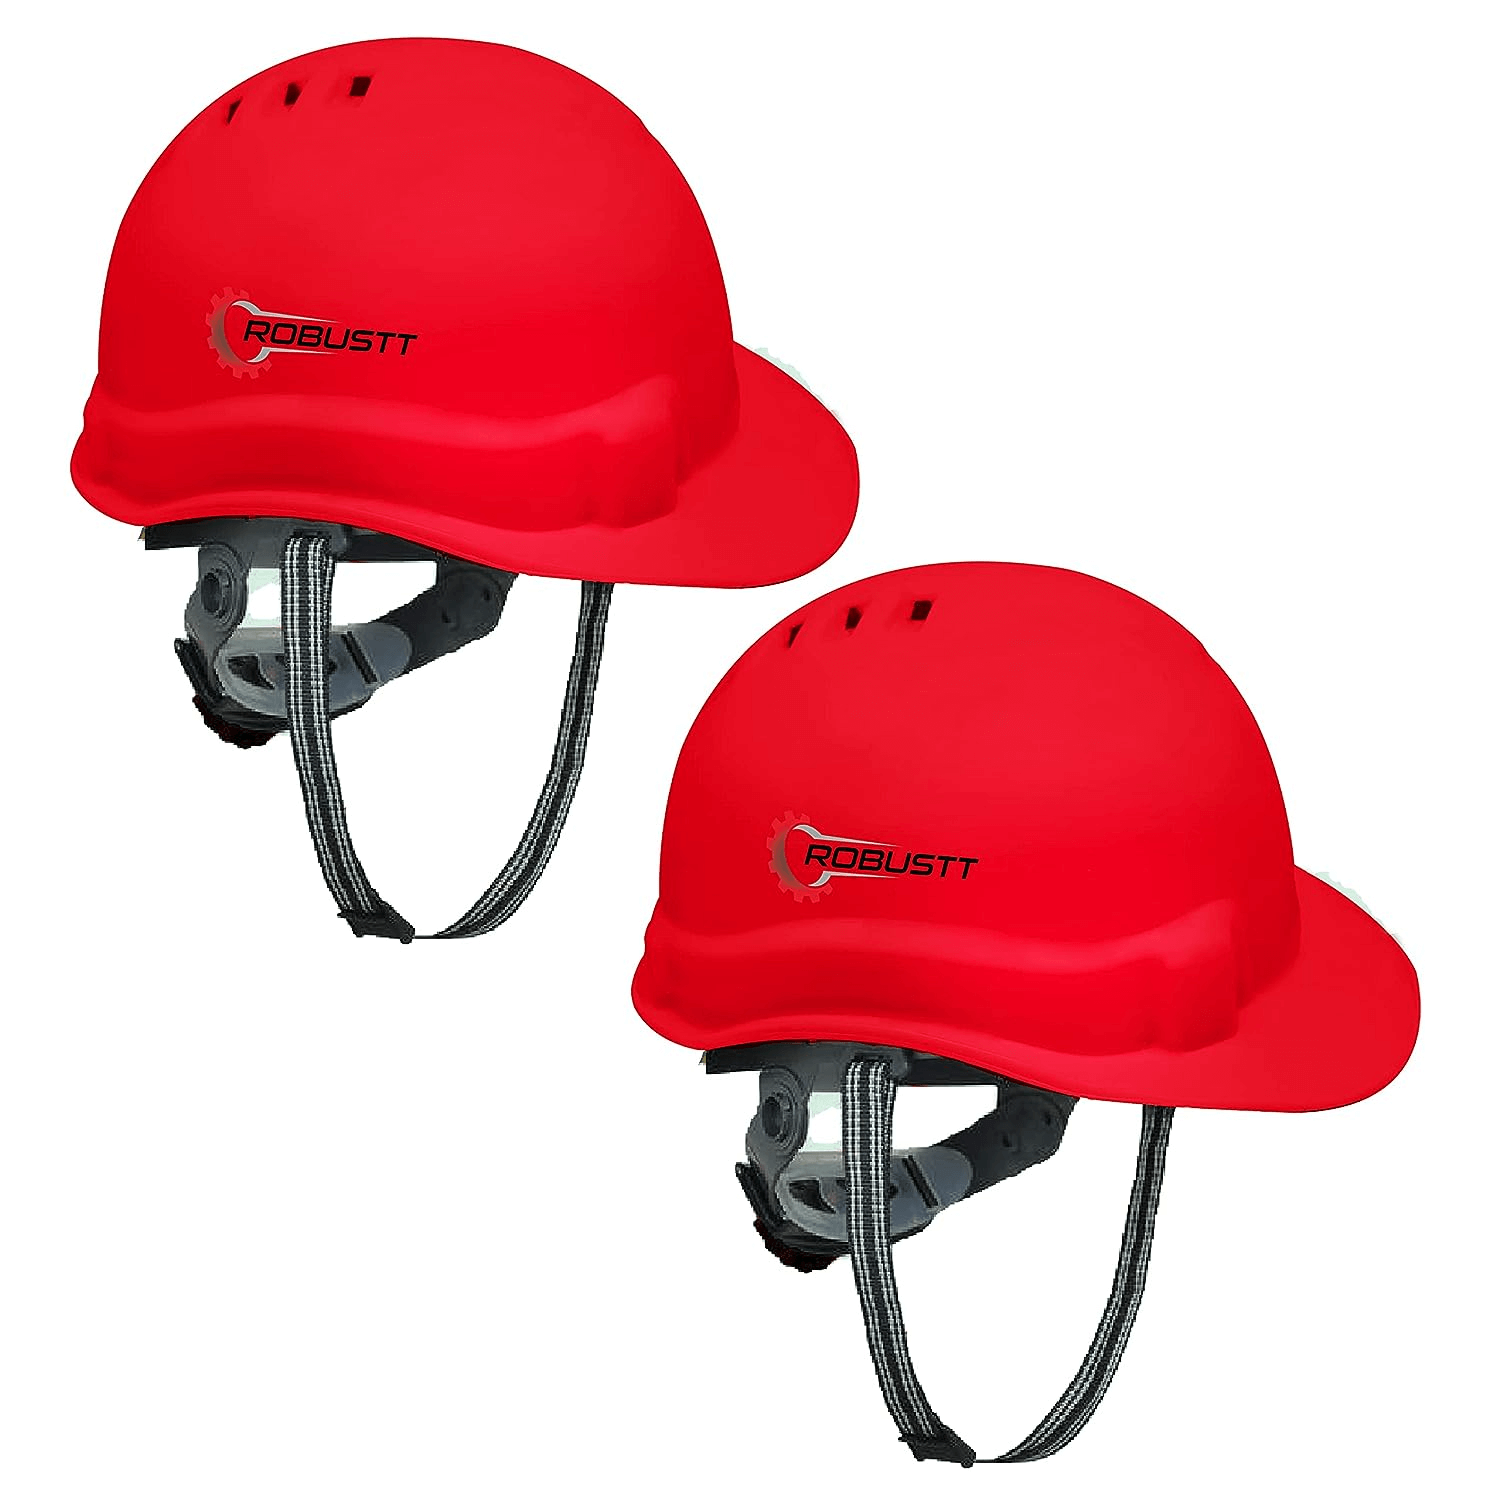 robustt-x-shree-jee-safety-helmet-executive-ratchet-type-adjustment-protection-for-outdoor-work-head-safety-hat-with-sweat-band-red-pack-of-2